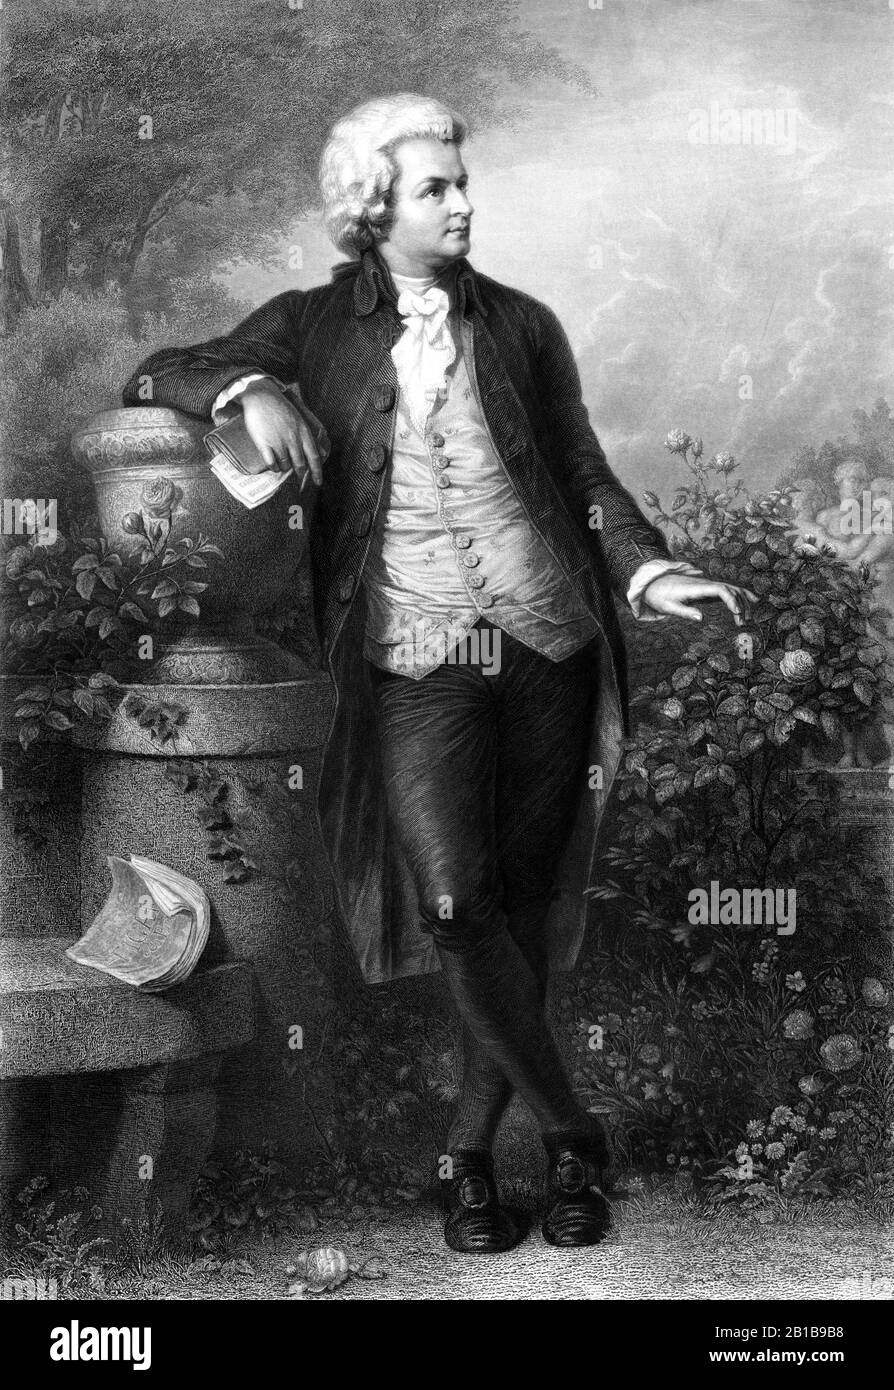 Vintage portrait of composer Wolfgang Amadeus Mozart (1756 – 1791). Undated print of an engraving by Paul Barfus, based on a work by Schworer. Stock Photo